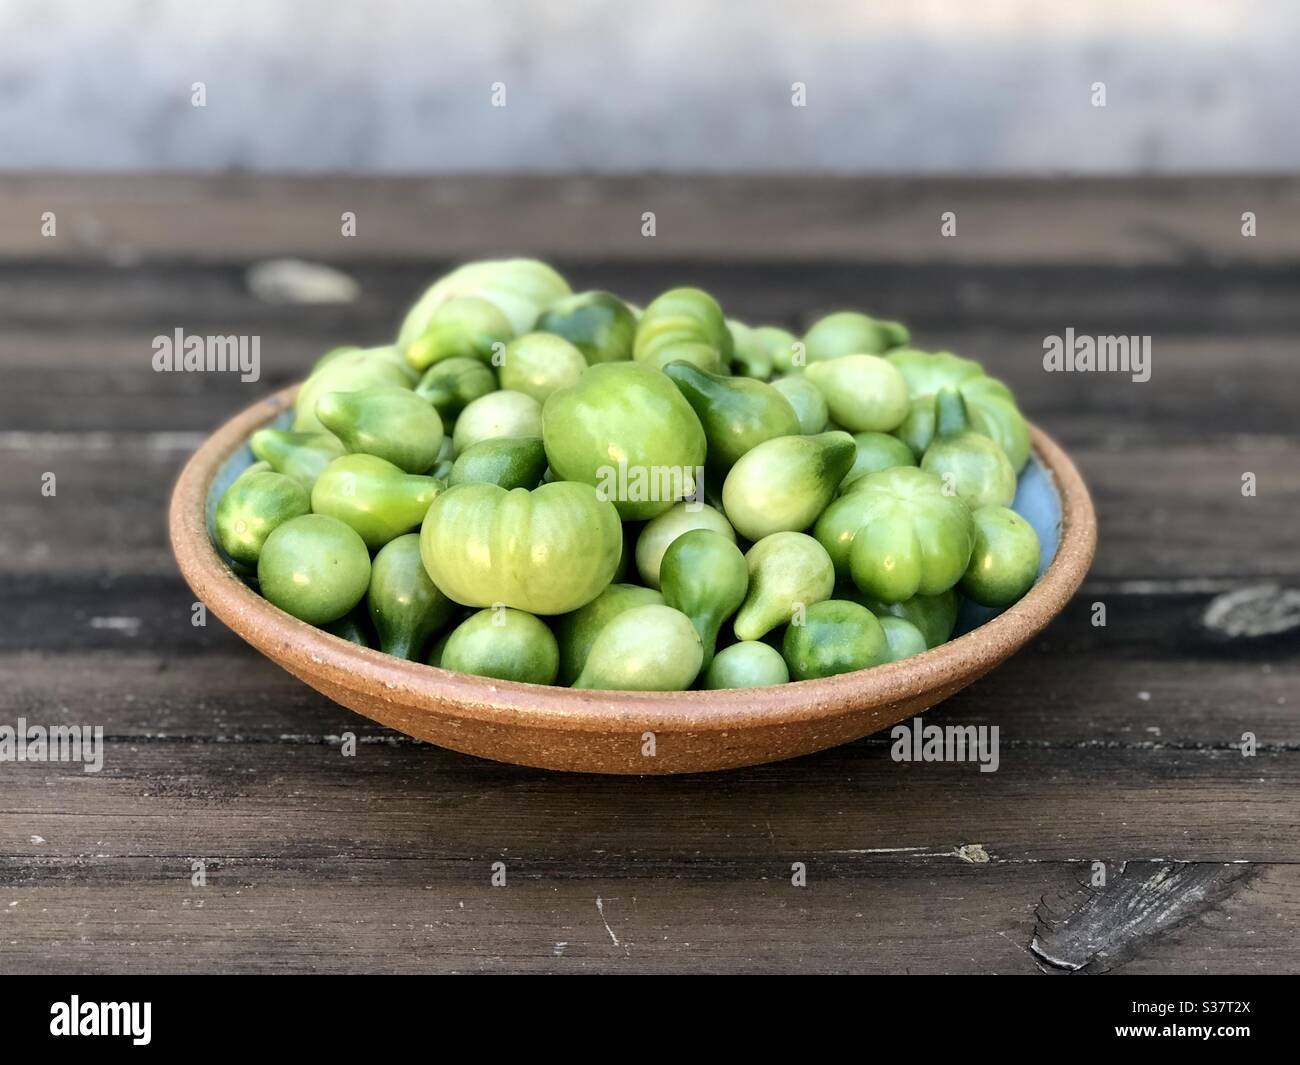 Green tomatoes for chutney or marmelade Stock Photo